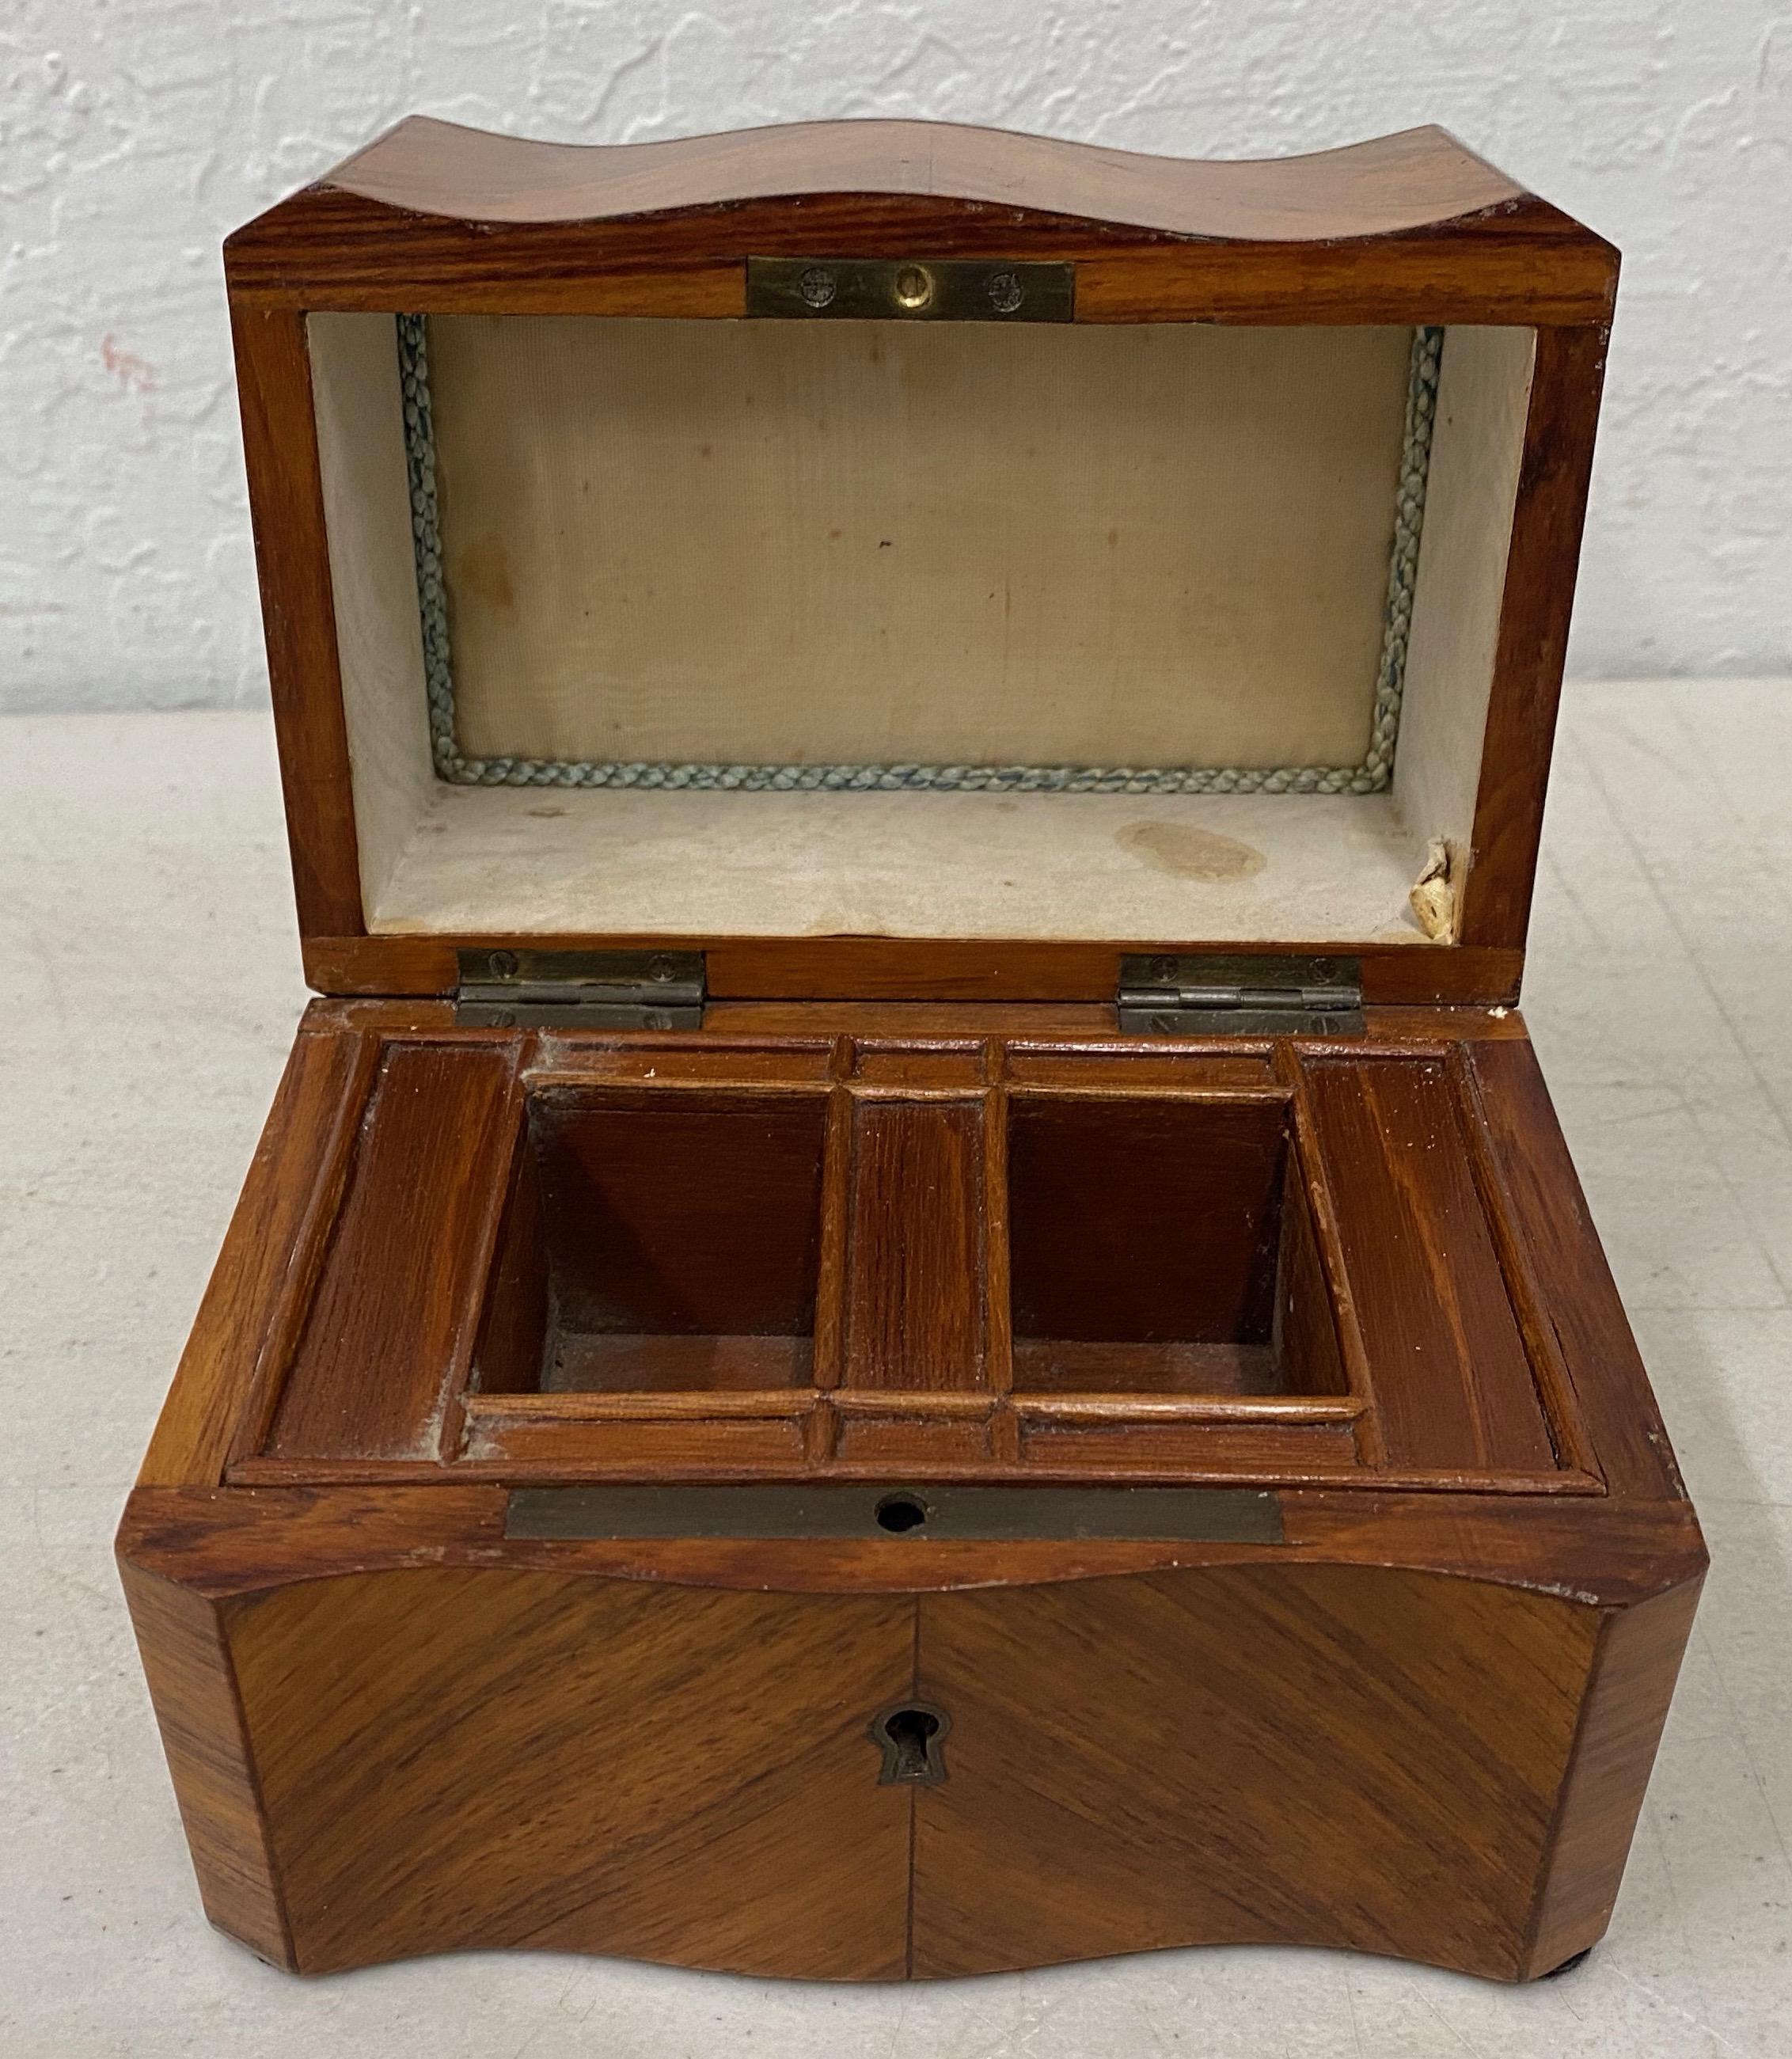 19th century crossbanded mahogany box with brass inlay

Beautiful old box with fitted interior. We don't know what this box originally held, but it would be a great jewelry box.

Dimensions 5.5